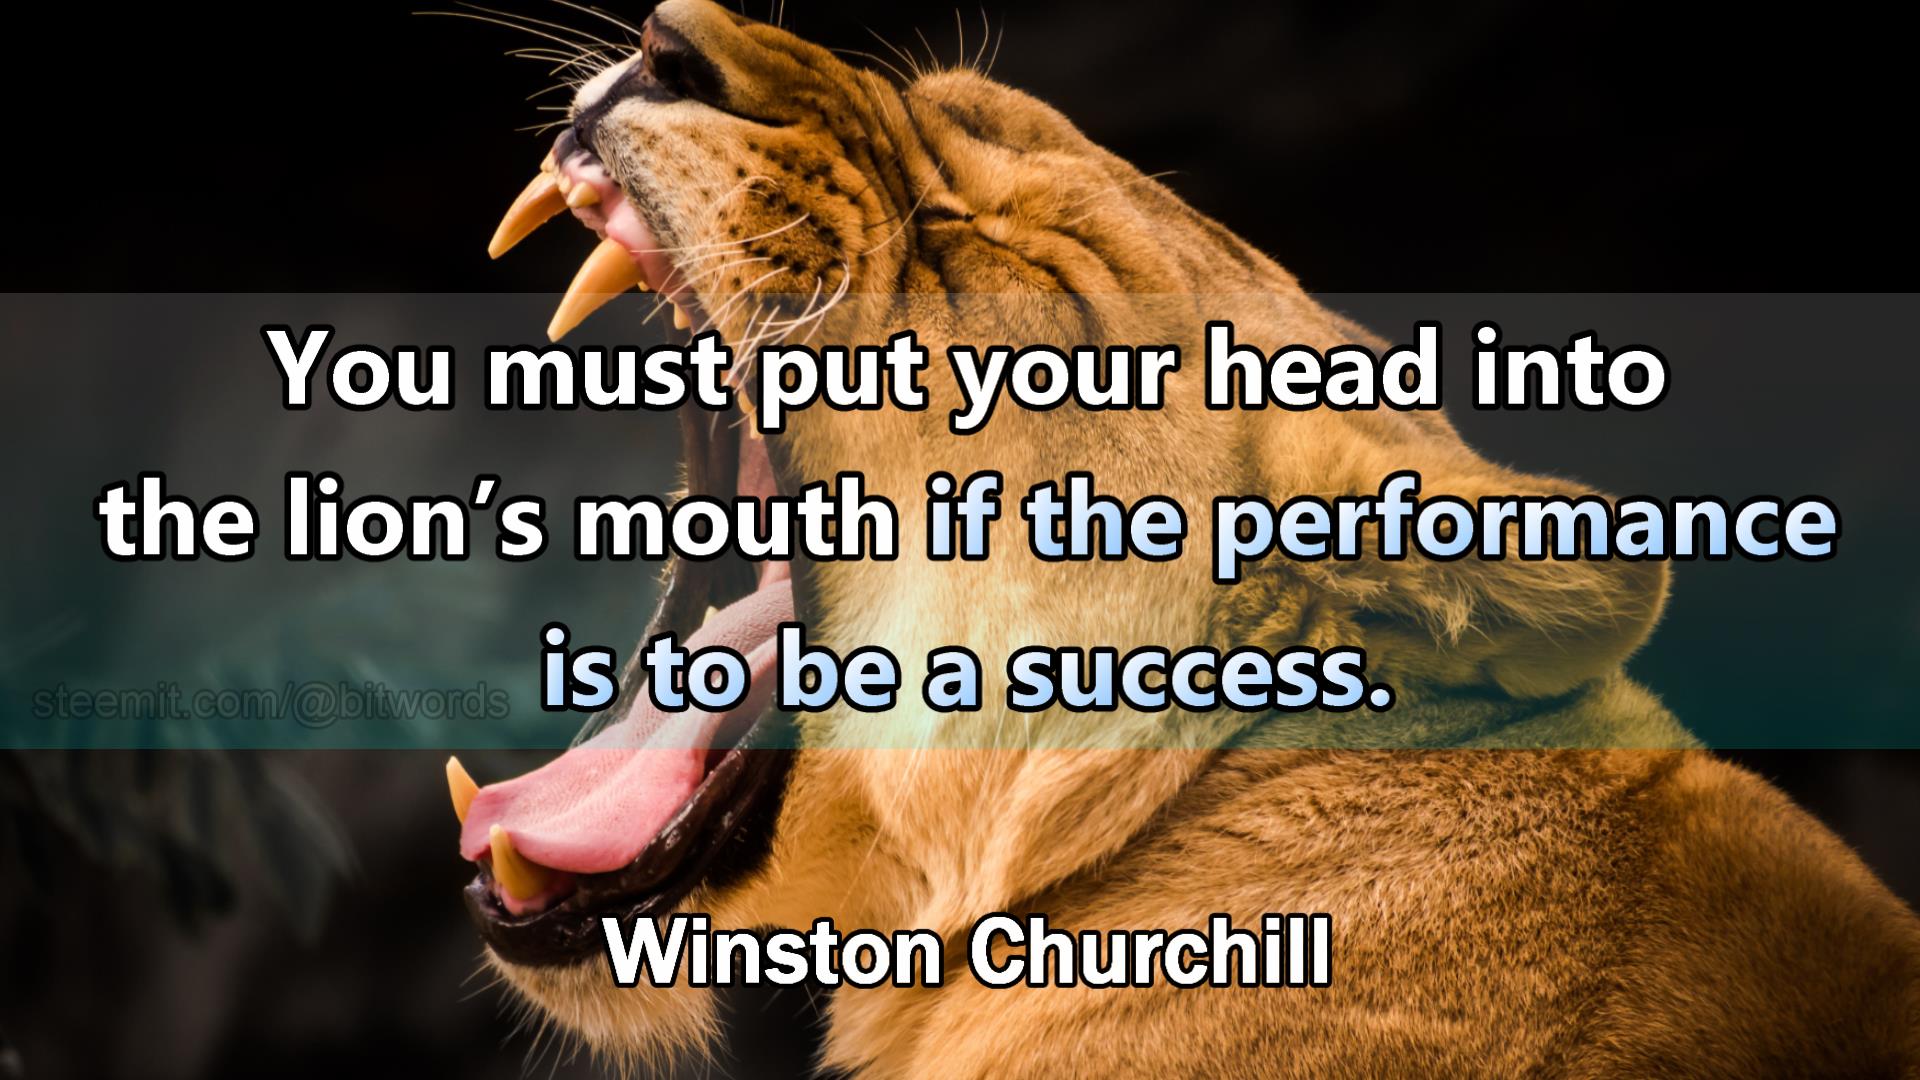 bitwords quotes inspirational by winston churchill.jpg